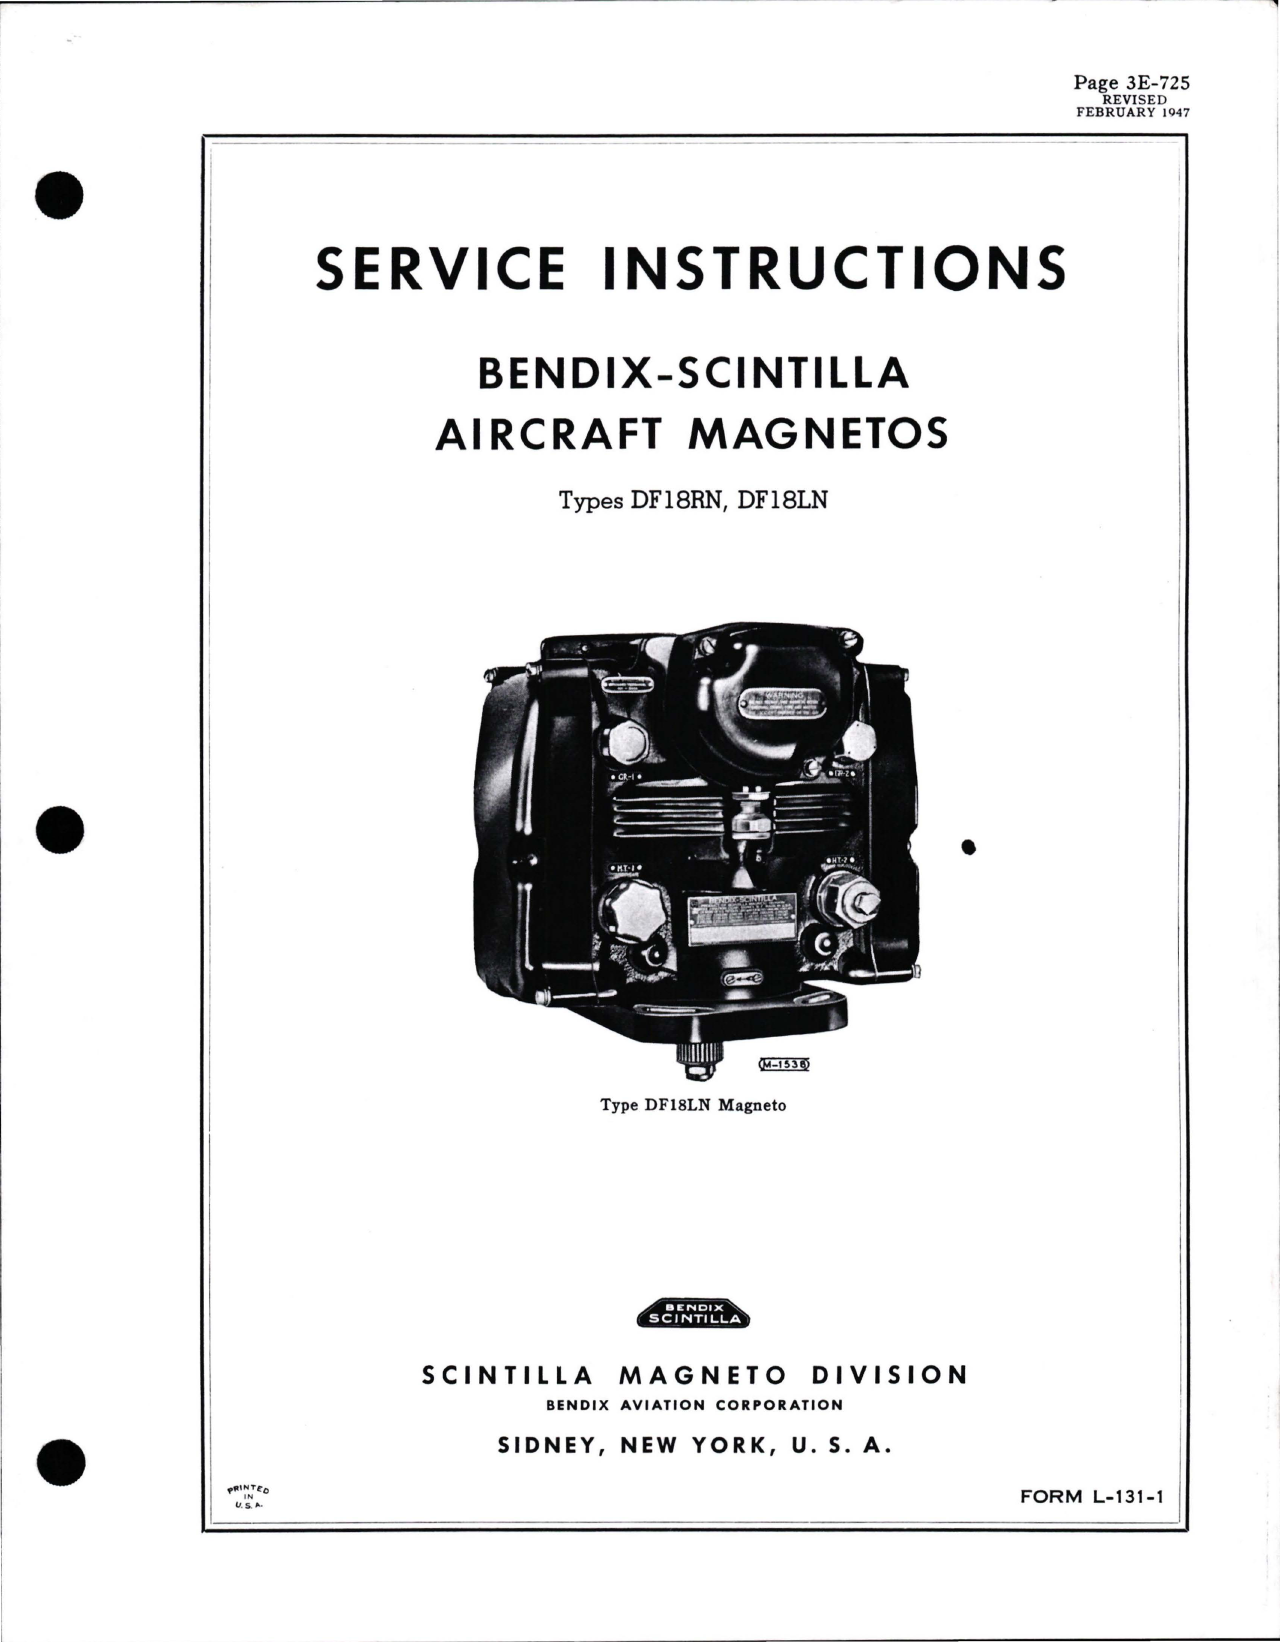 Sample page 1 from AirCorps Library document: Service Instructions for Aircraft Magnetos - Types DF18RN and DF18LN